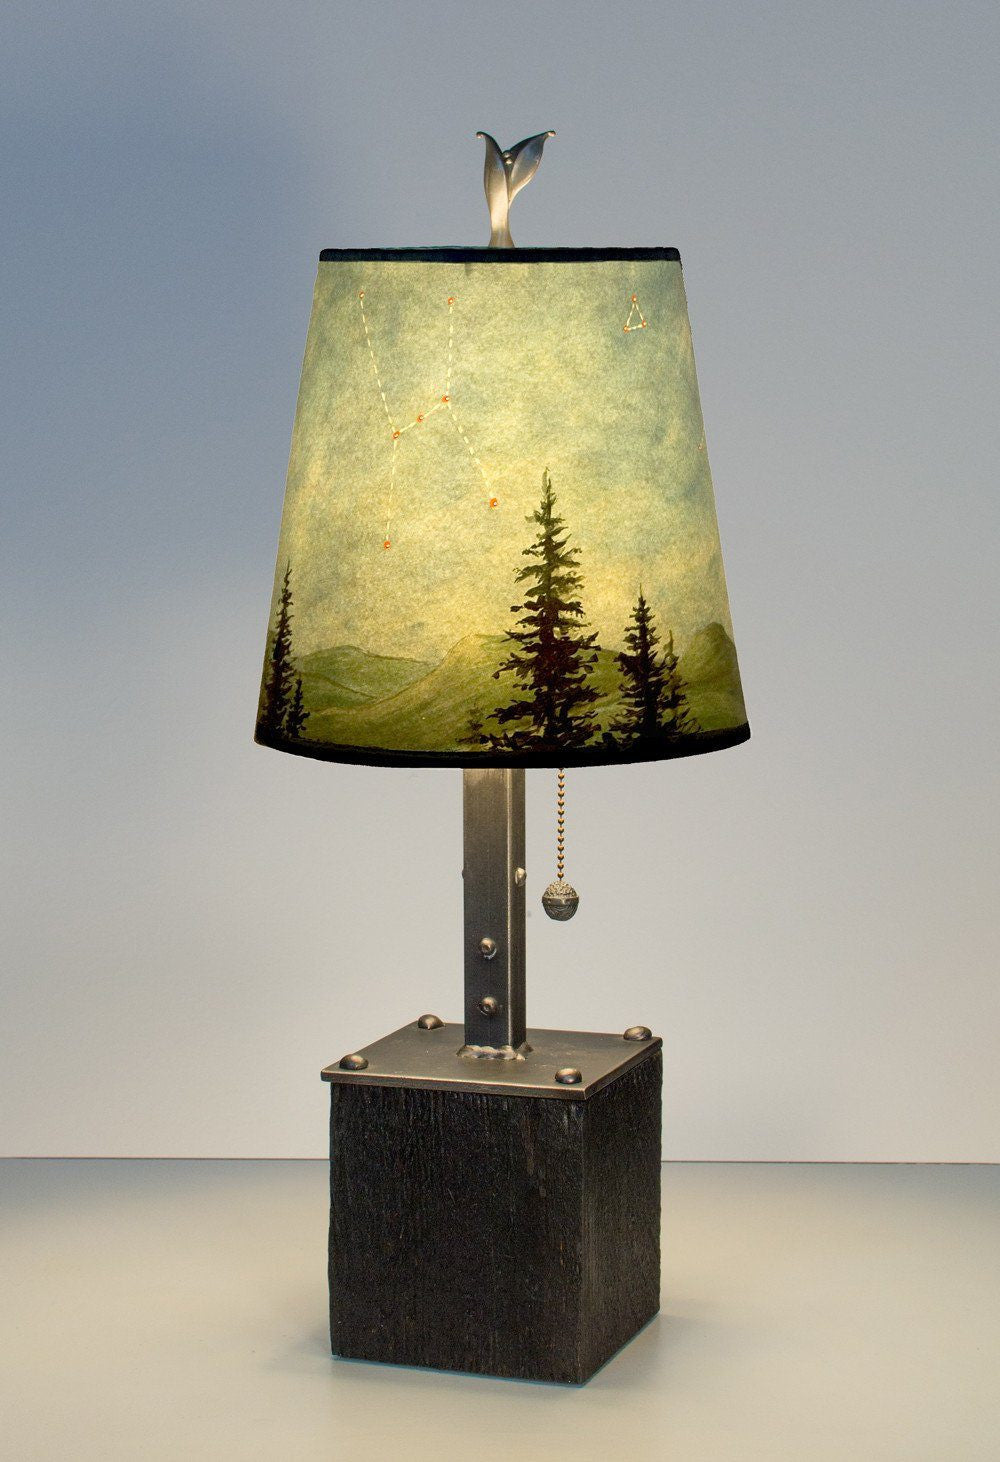 Janna Ugone & Co Table Lamps Steel Table Lamp on Reclaimed Wood with Small Drum Shade in Midnight Sky